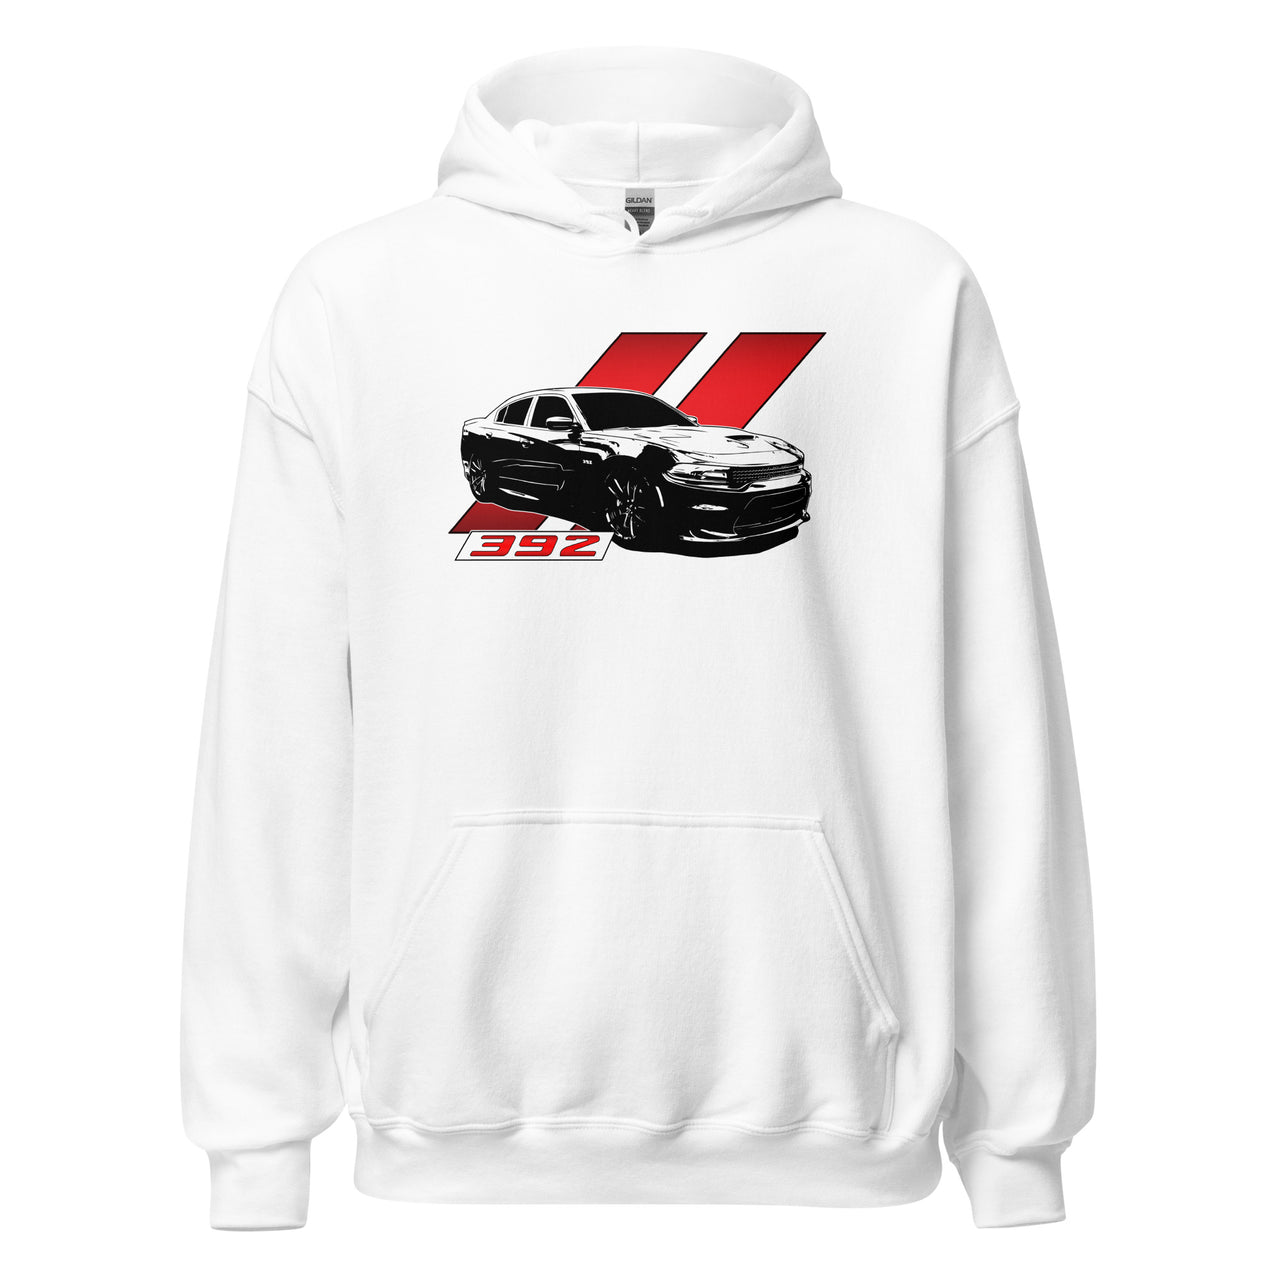 Charger 392 Hoodie in white